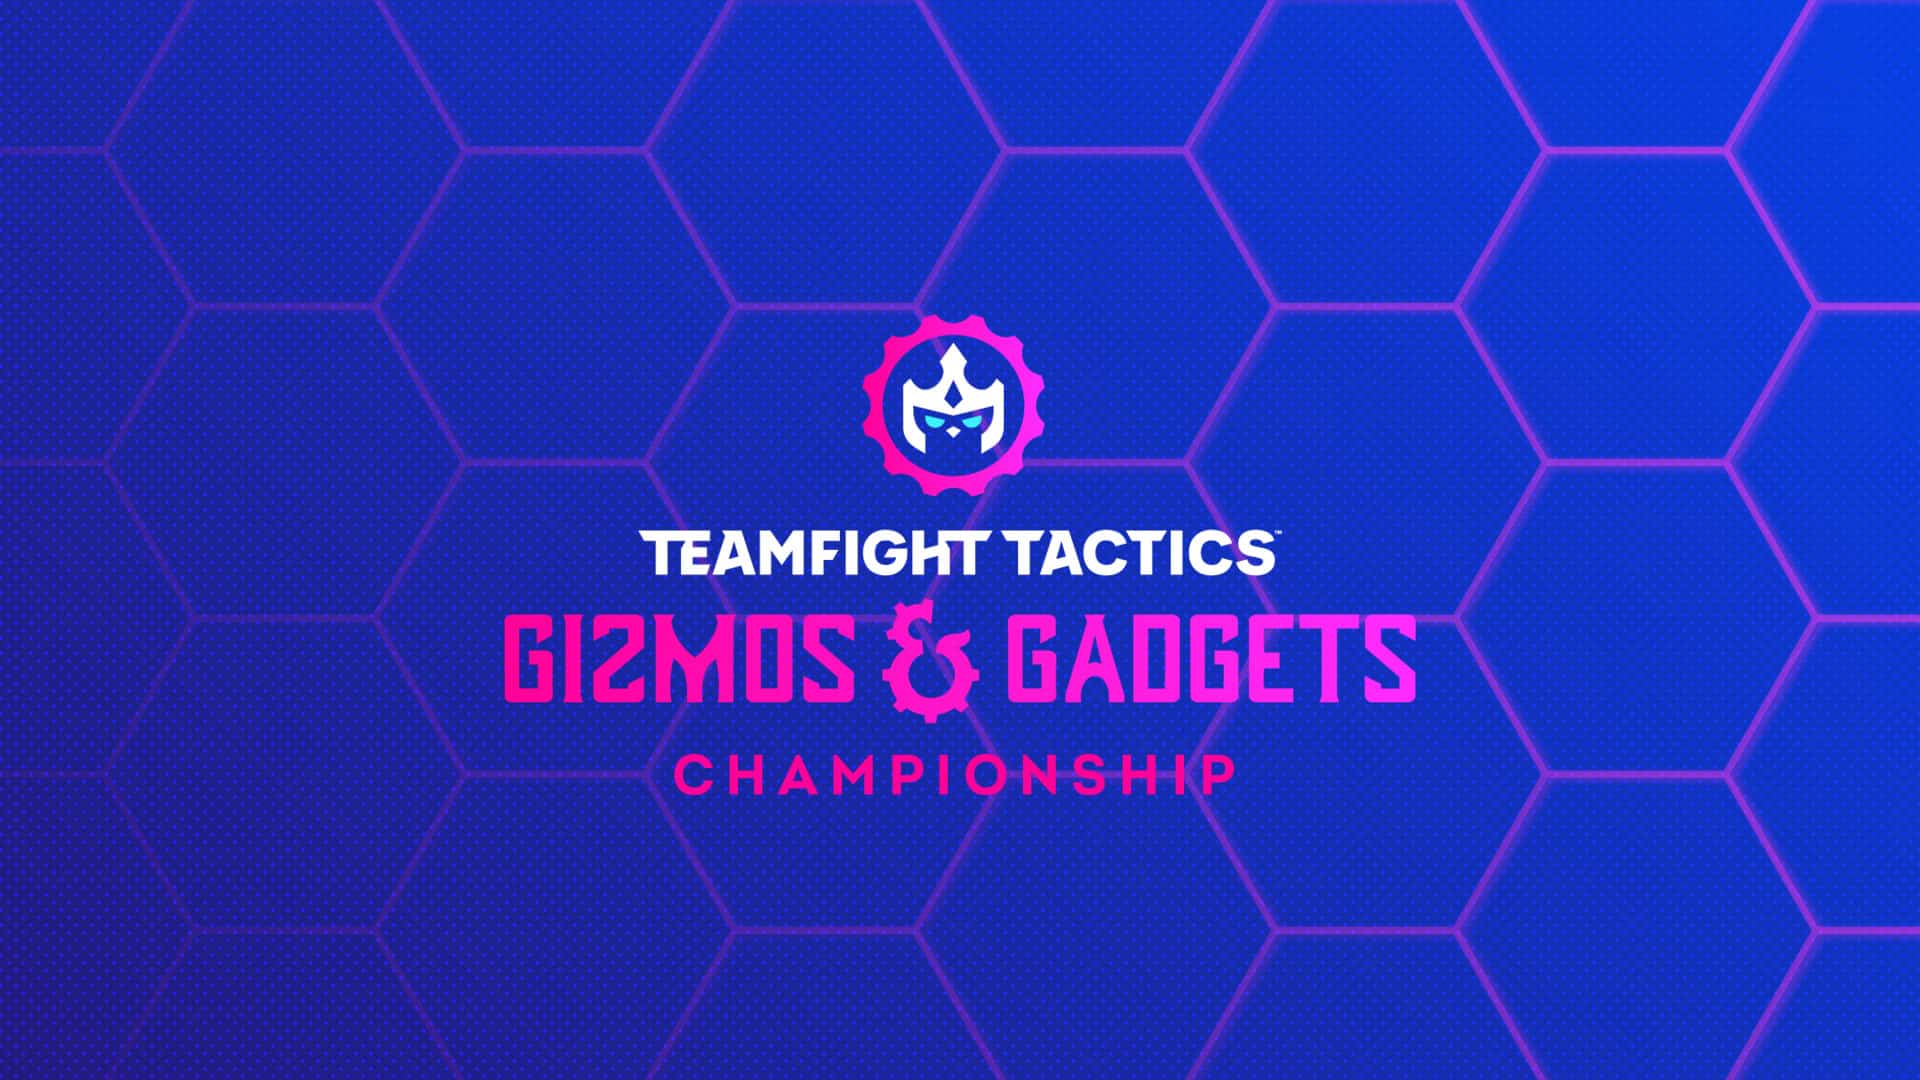 TFT Gizmos and Gadgets championship promo art on blue background